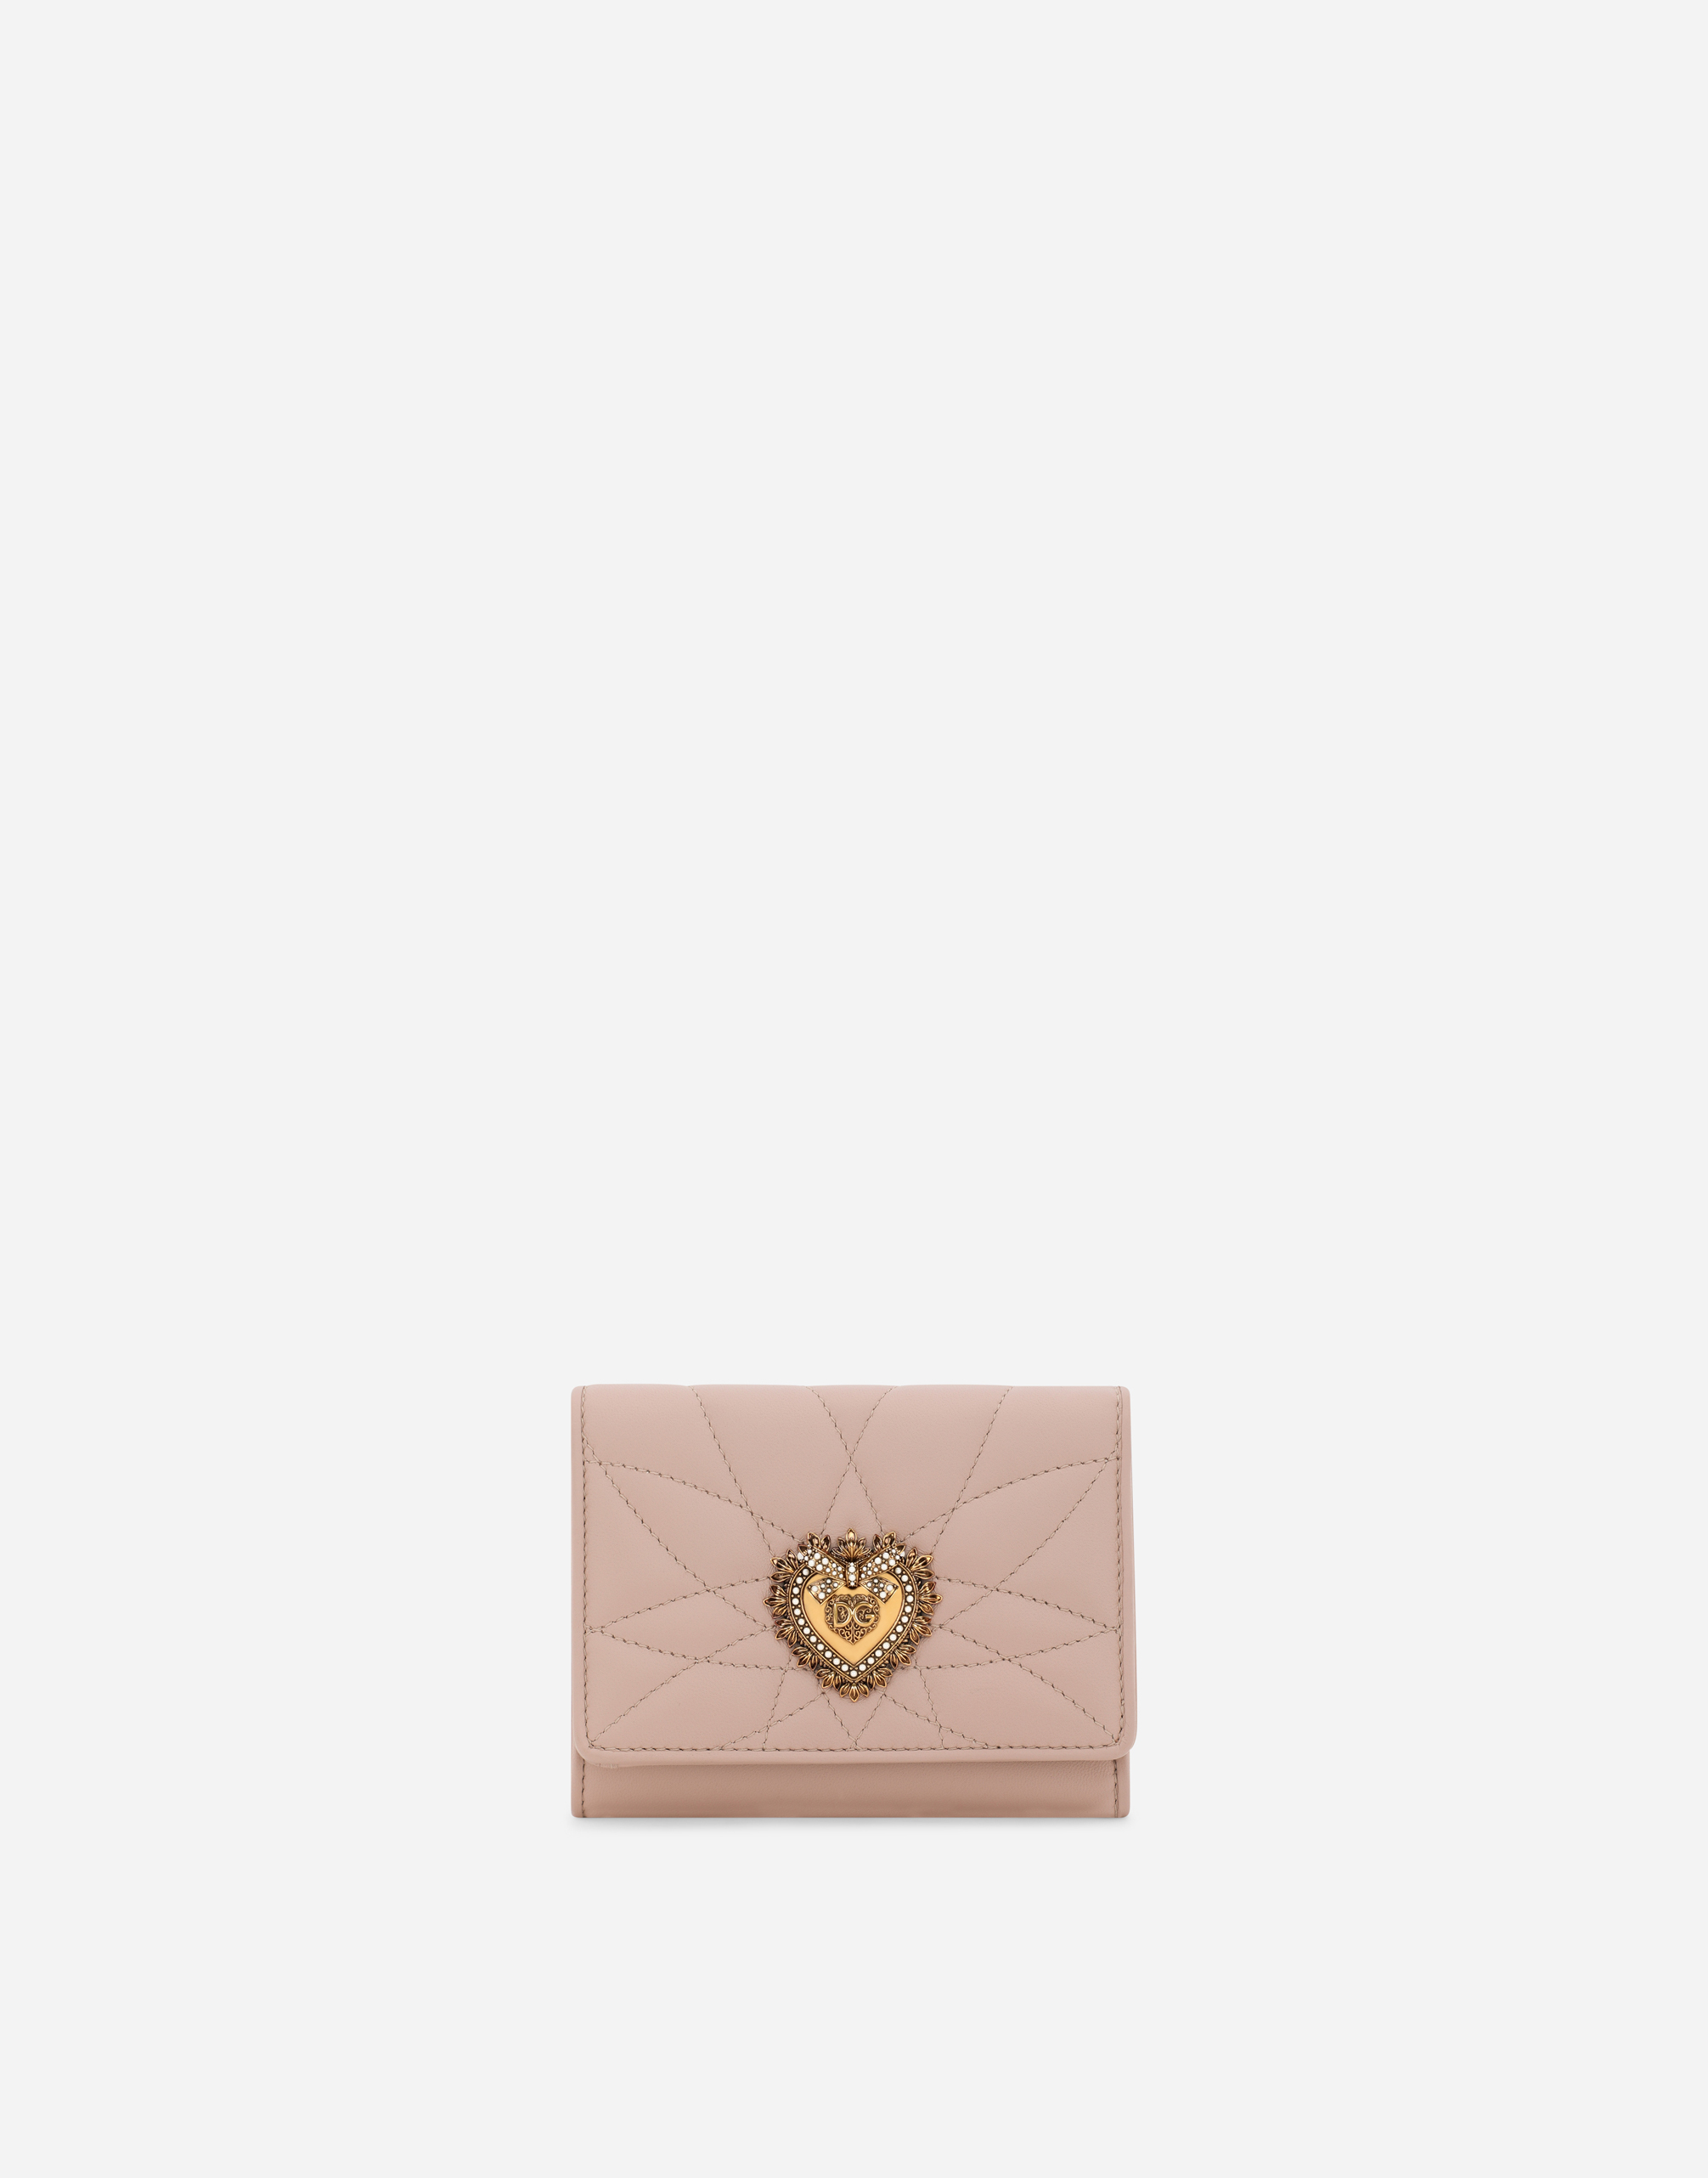 SMALL LEATHER GOODS  in Pale Pink